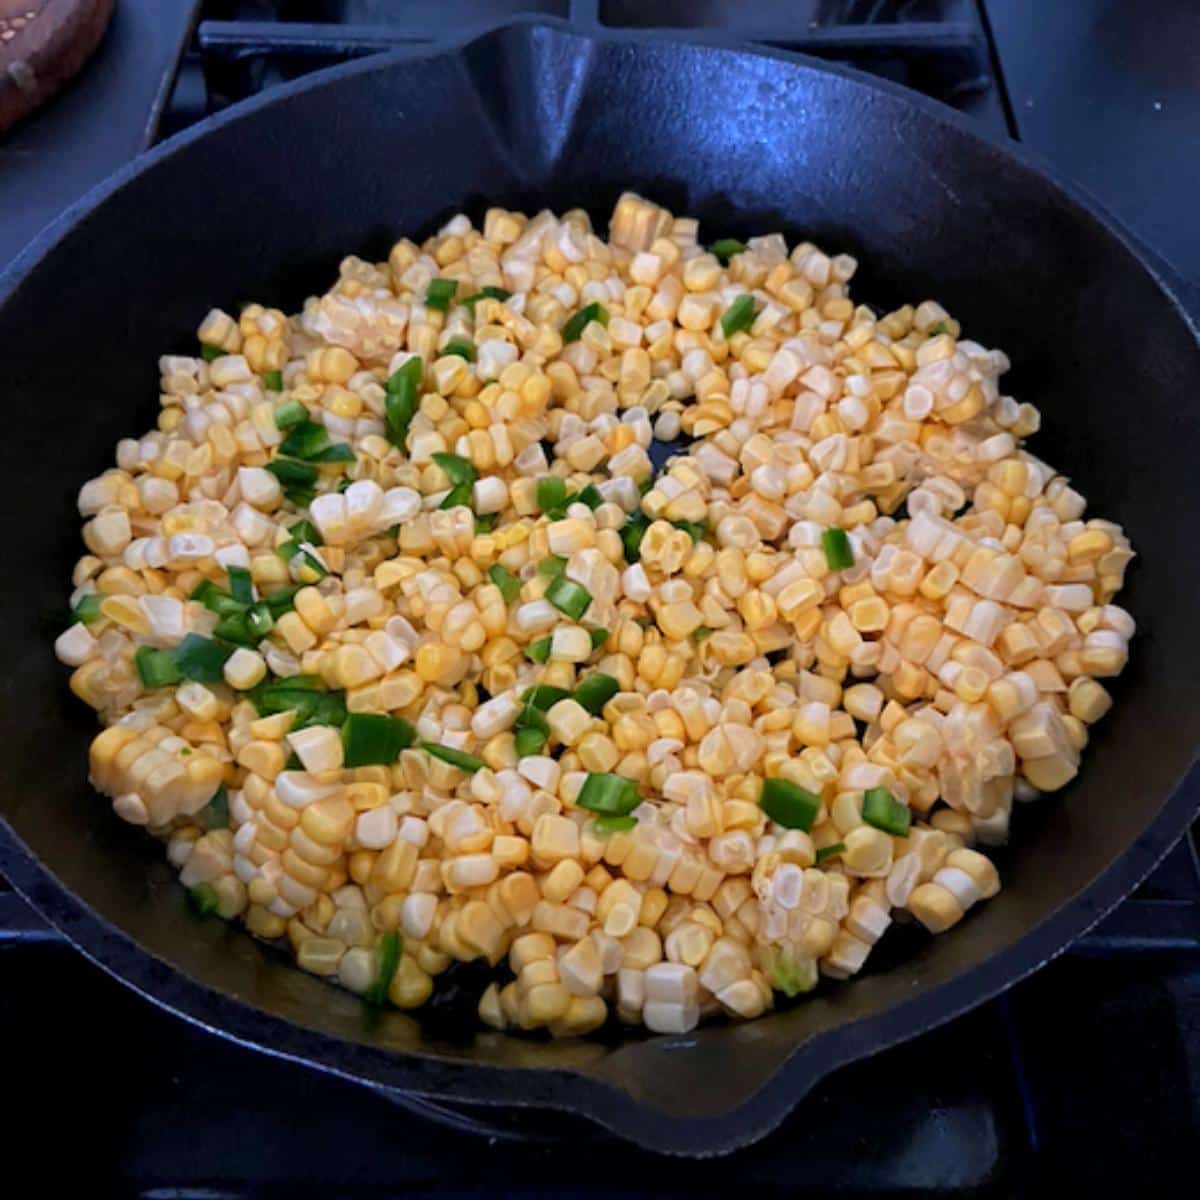 jalapeno and corn in skillet